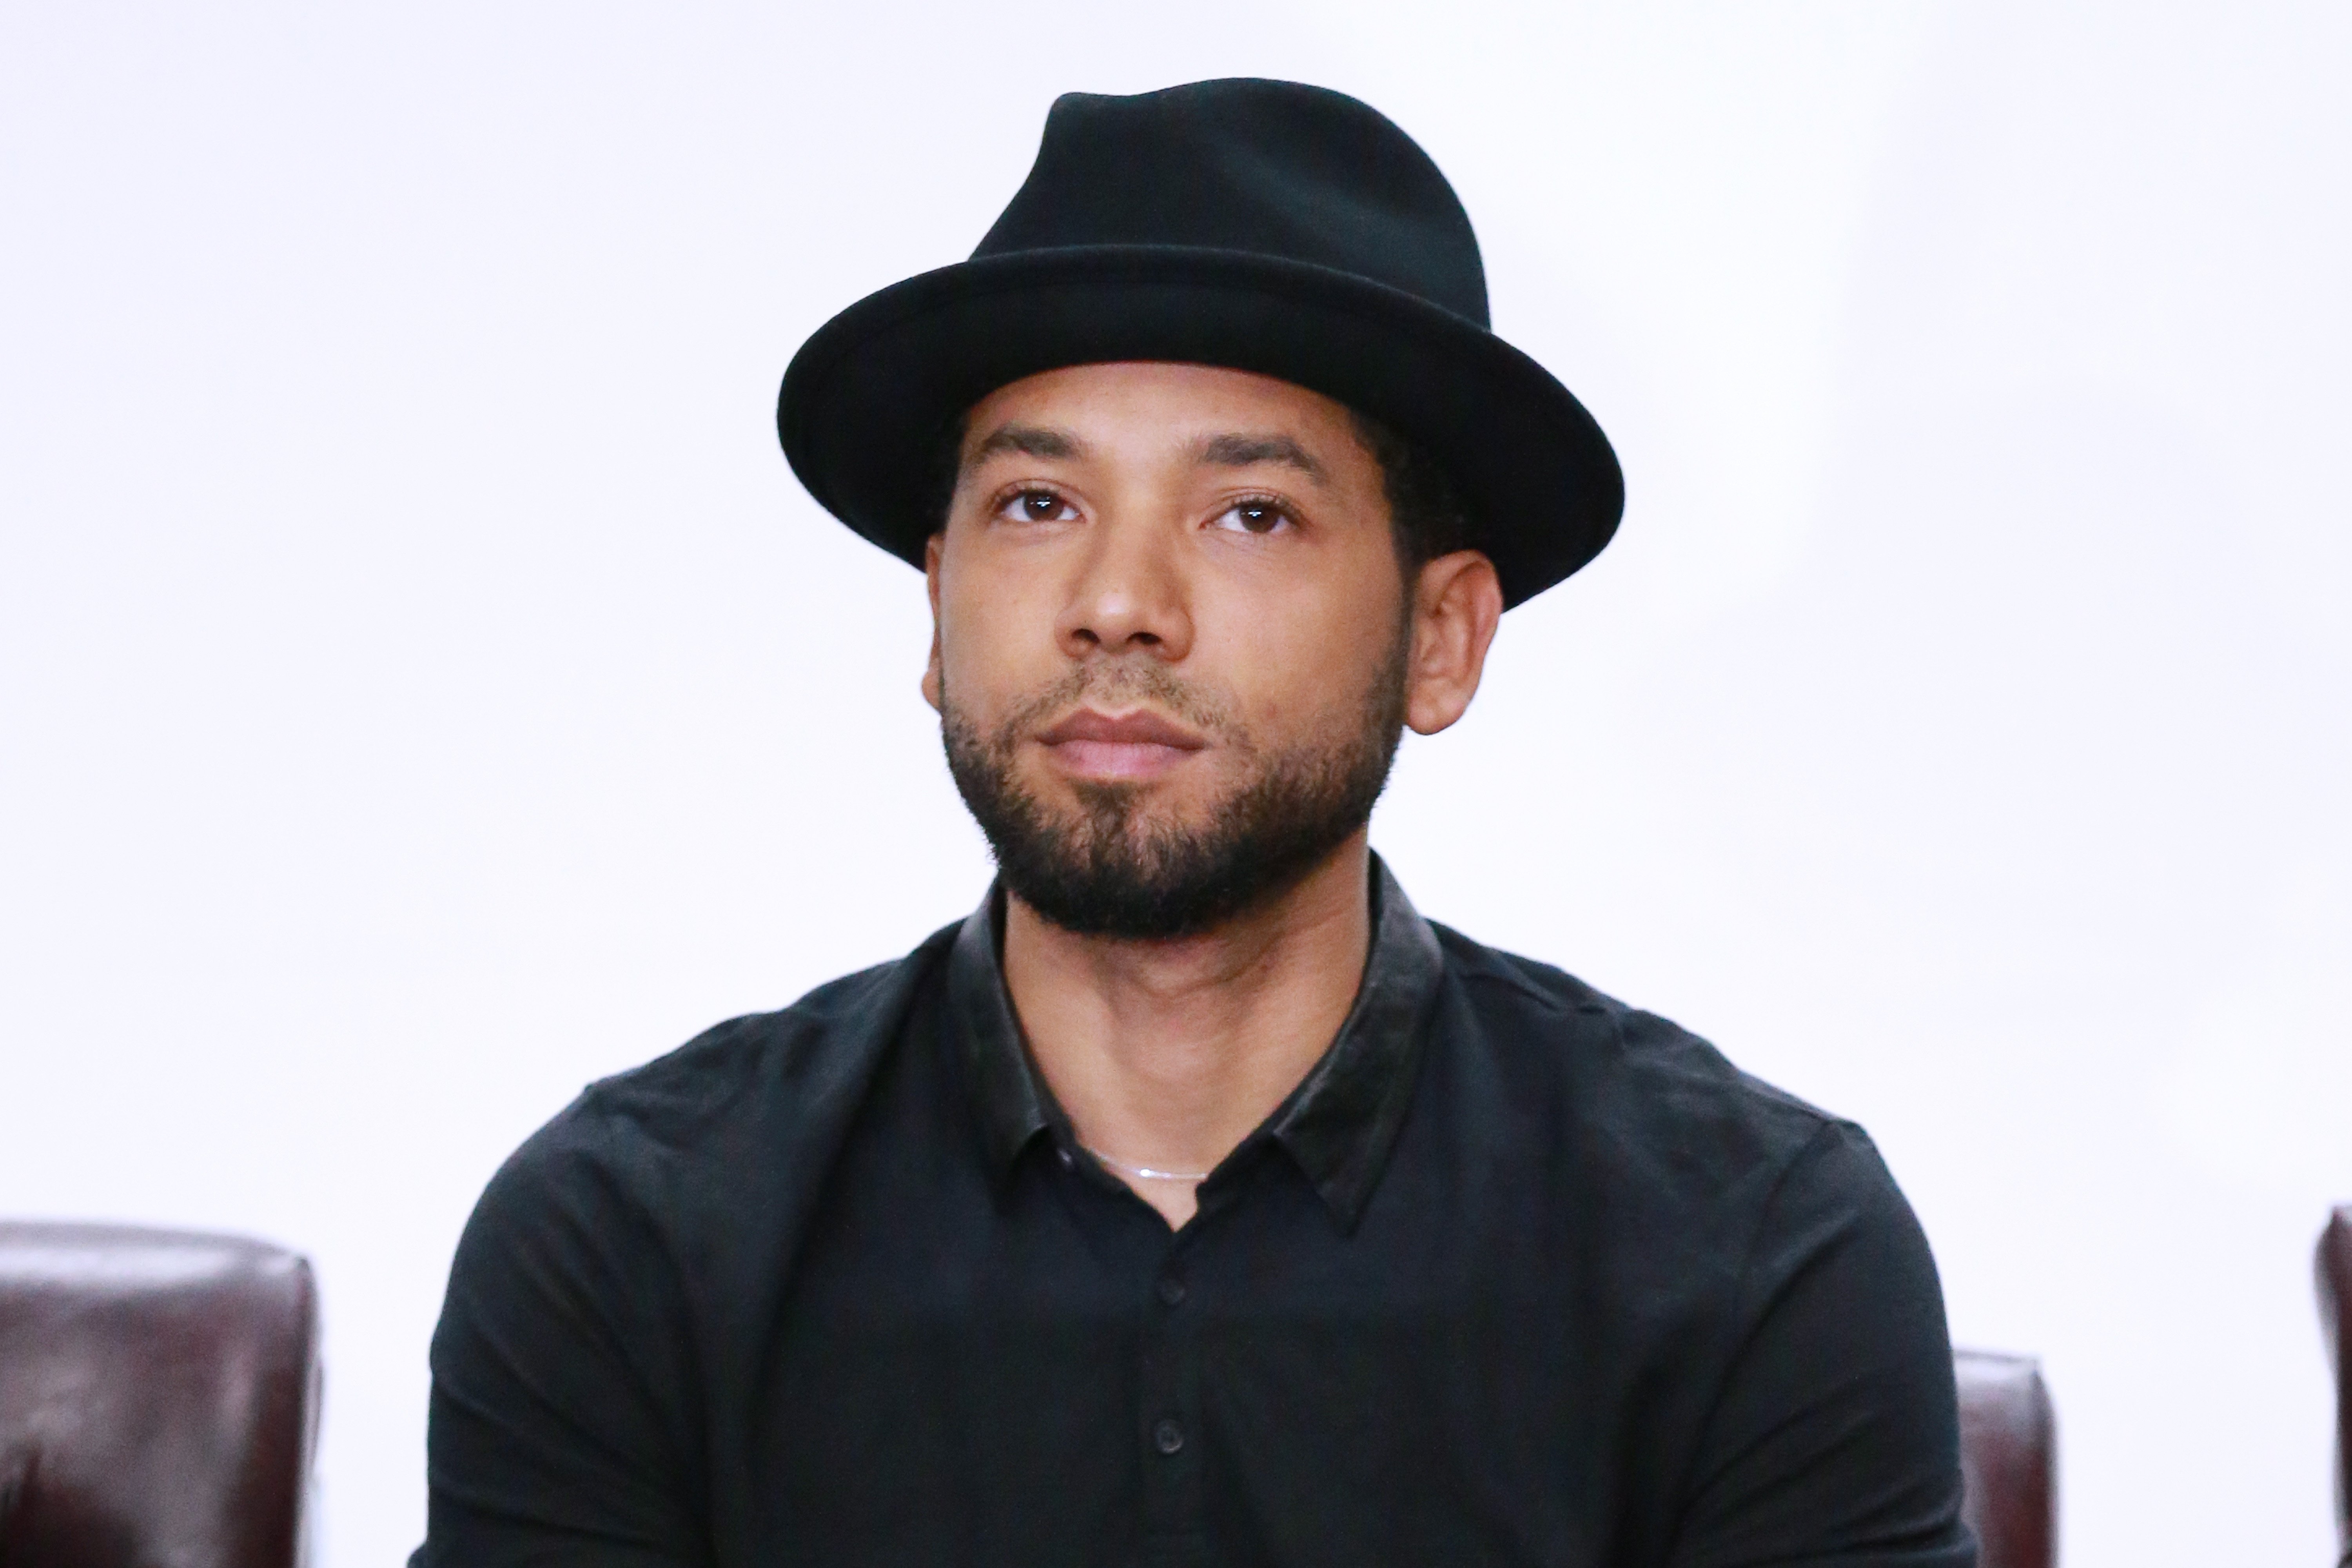 Jussie Smollett attends the Compton High School Student Screening Of Open Road Films' "Marshall." | Photo: GettyImages